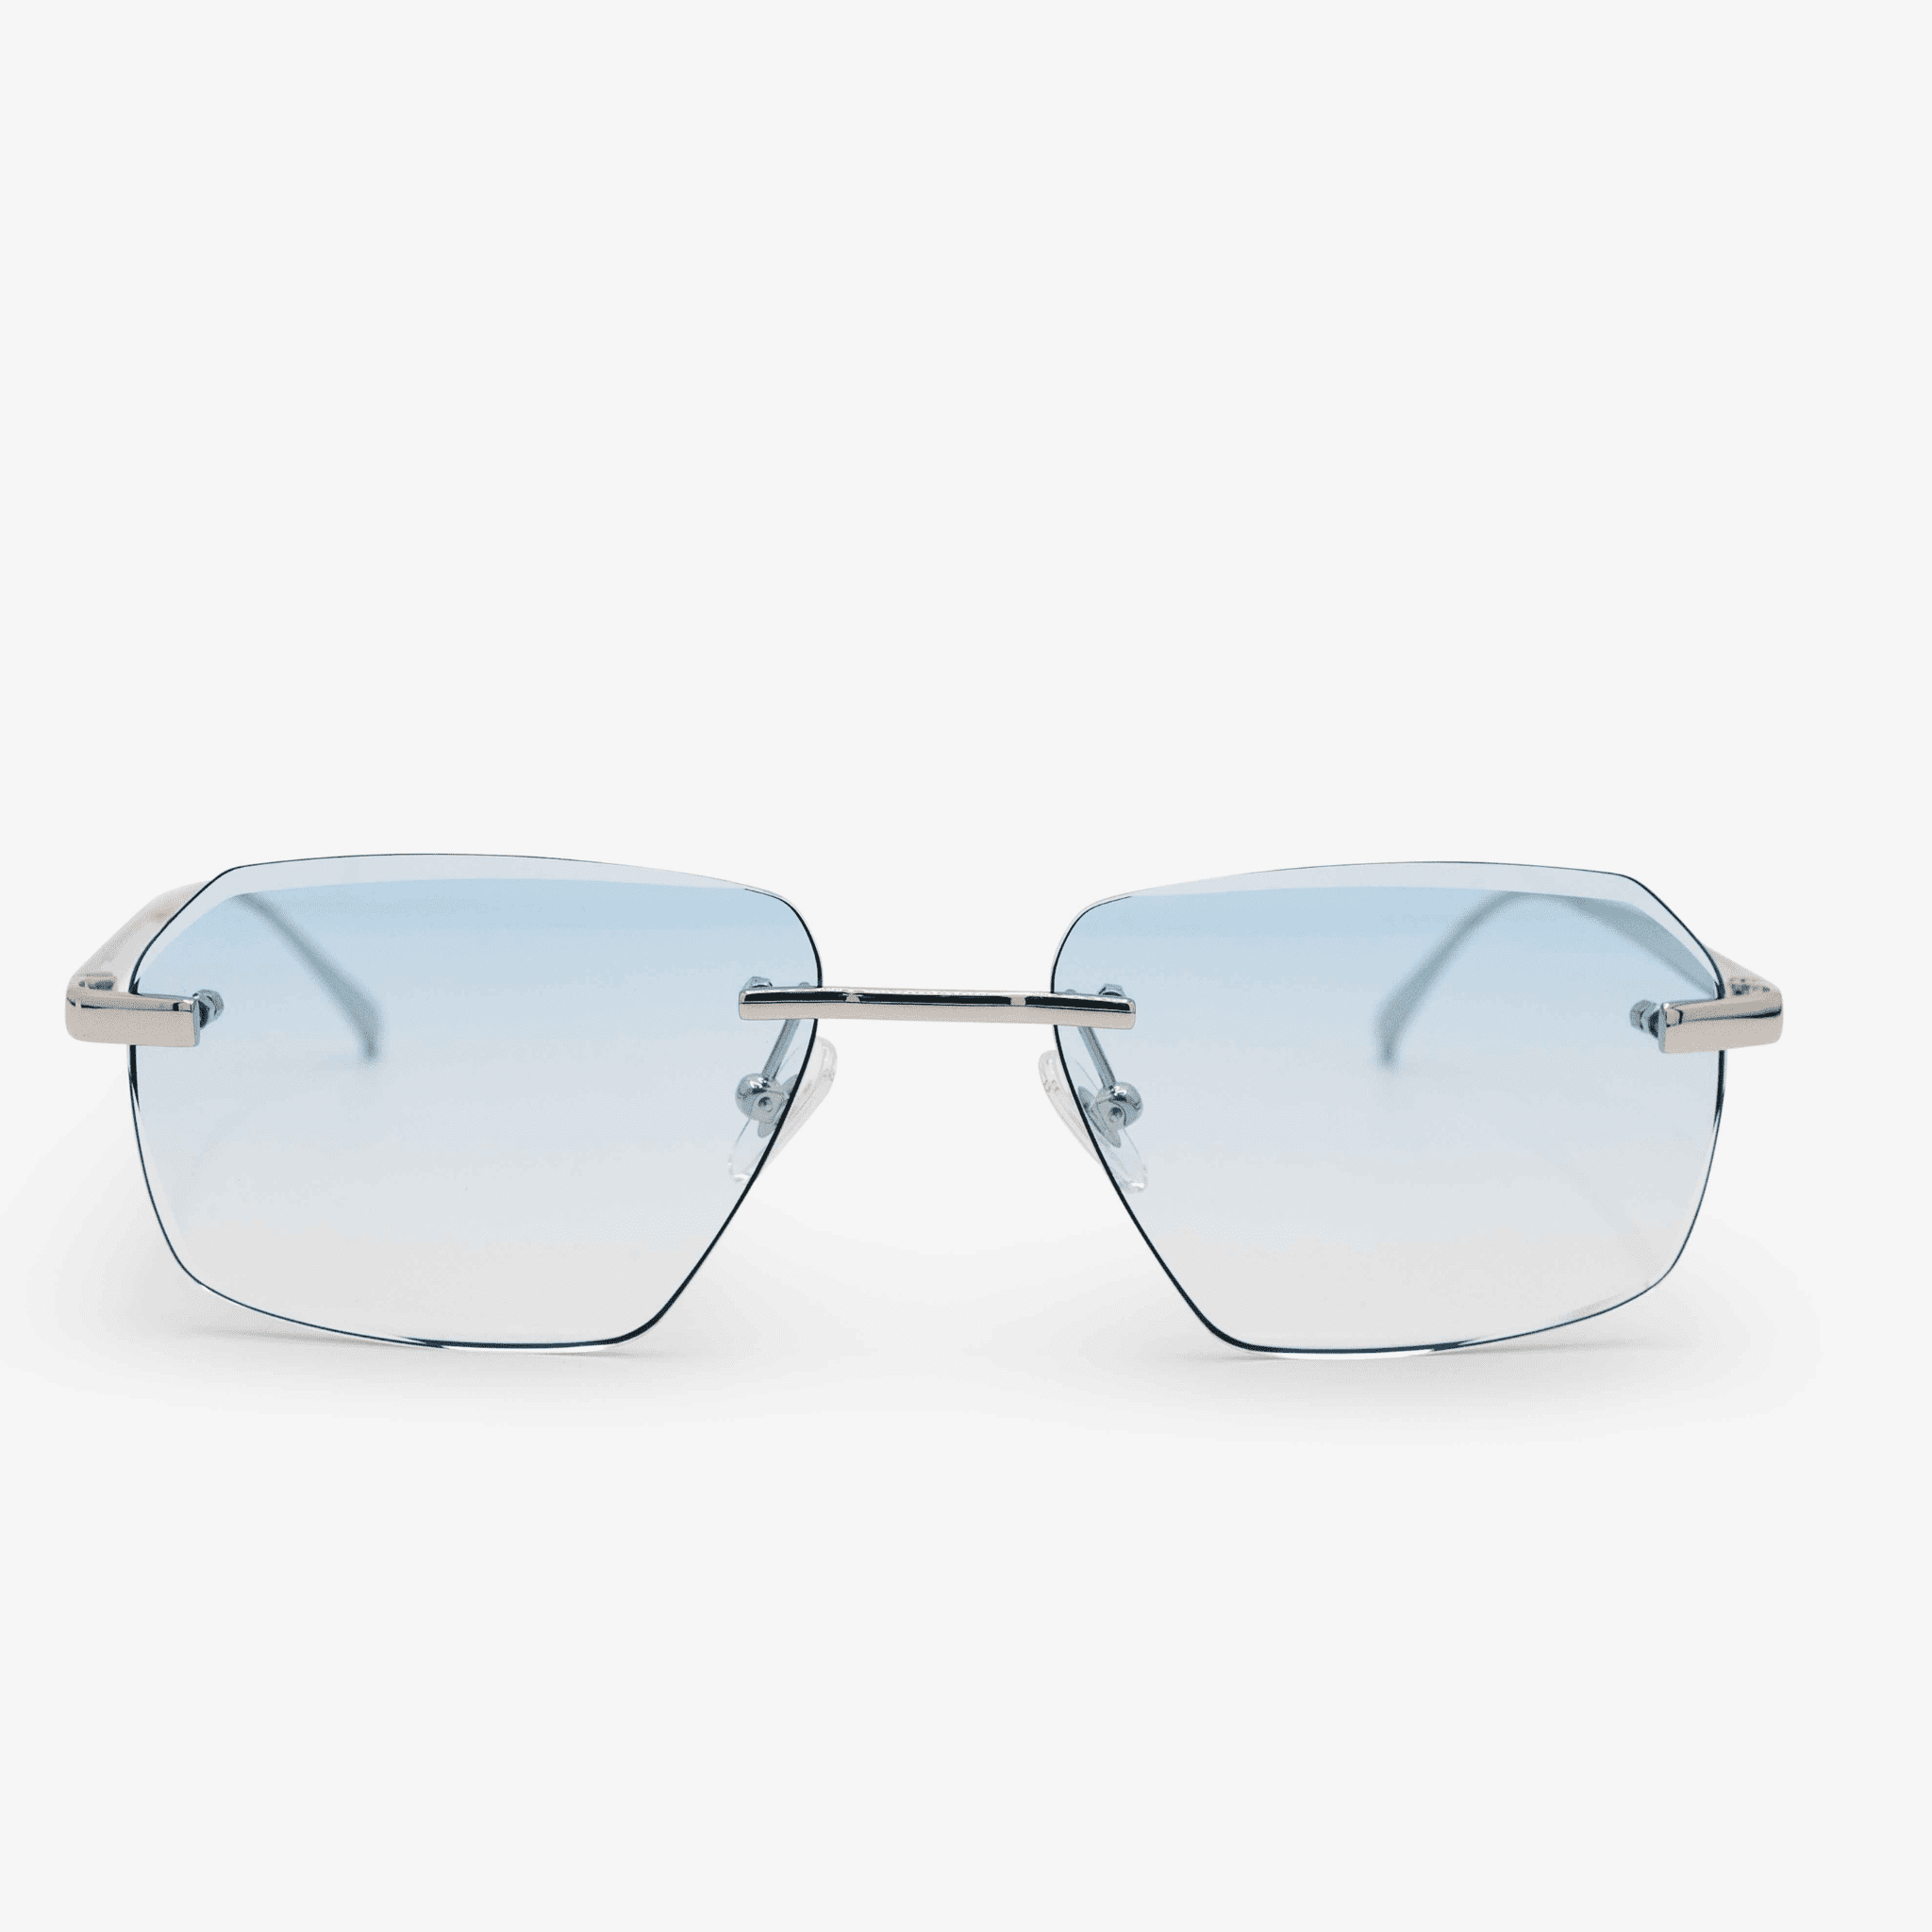 Model Sancy sunglasses with a clean, diamond-cut rimless design and sky blue lenses, featuring elegant sterling silver frame accents, presented on a pure white background.